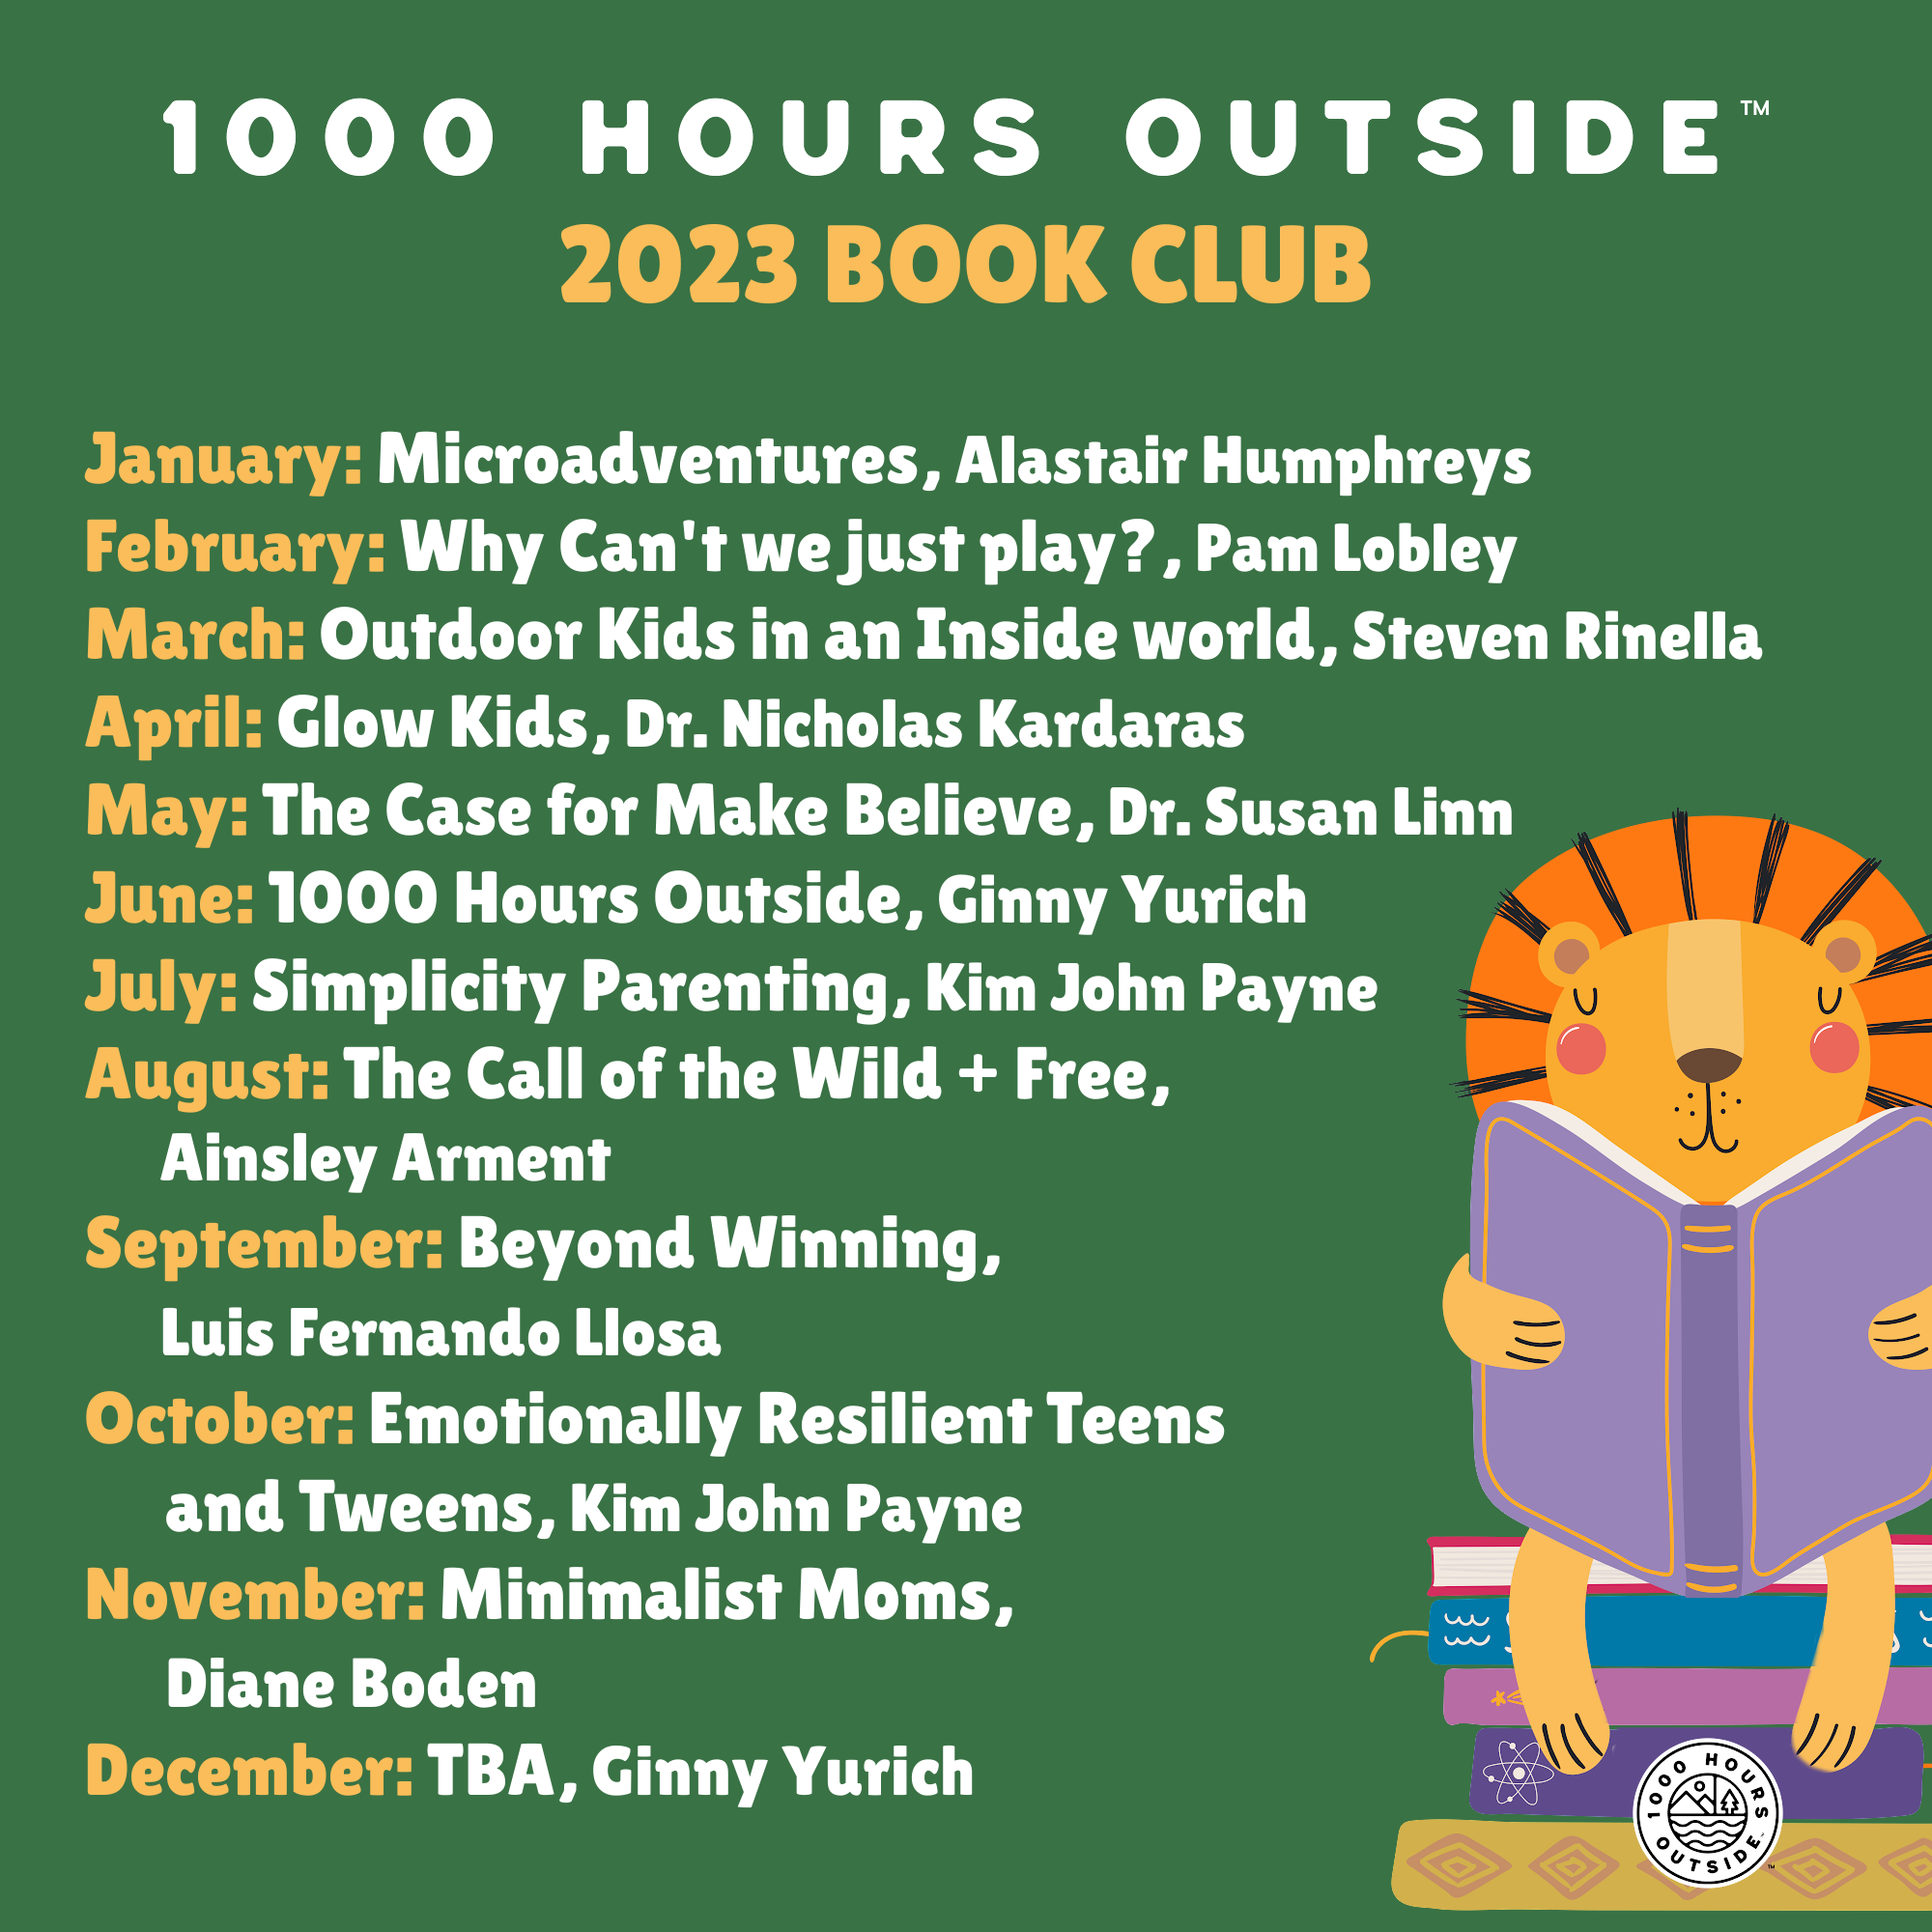 2023 Book Club Information — 1000 Hours Outside